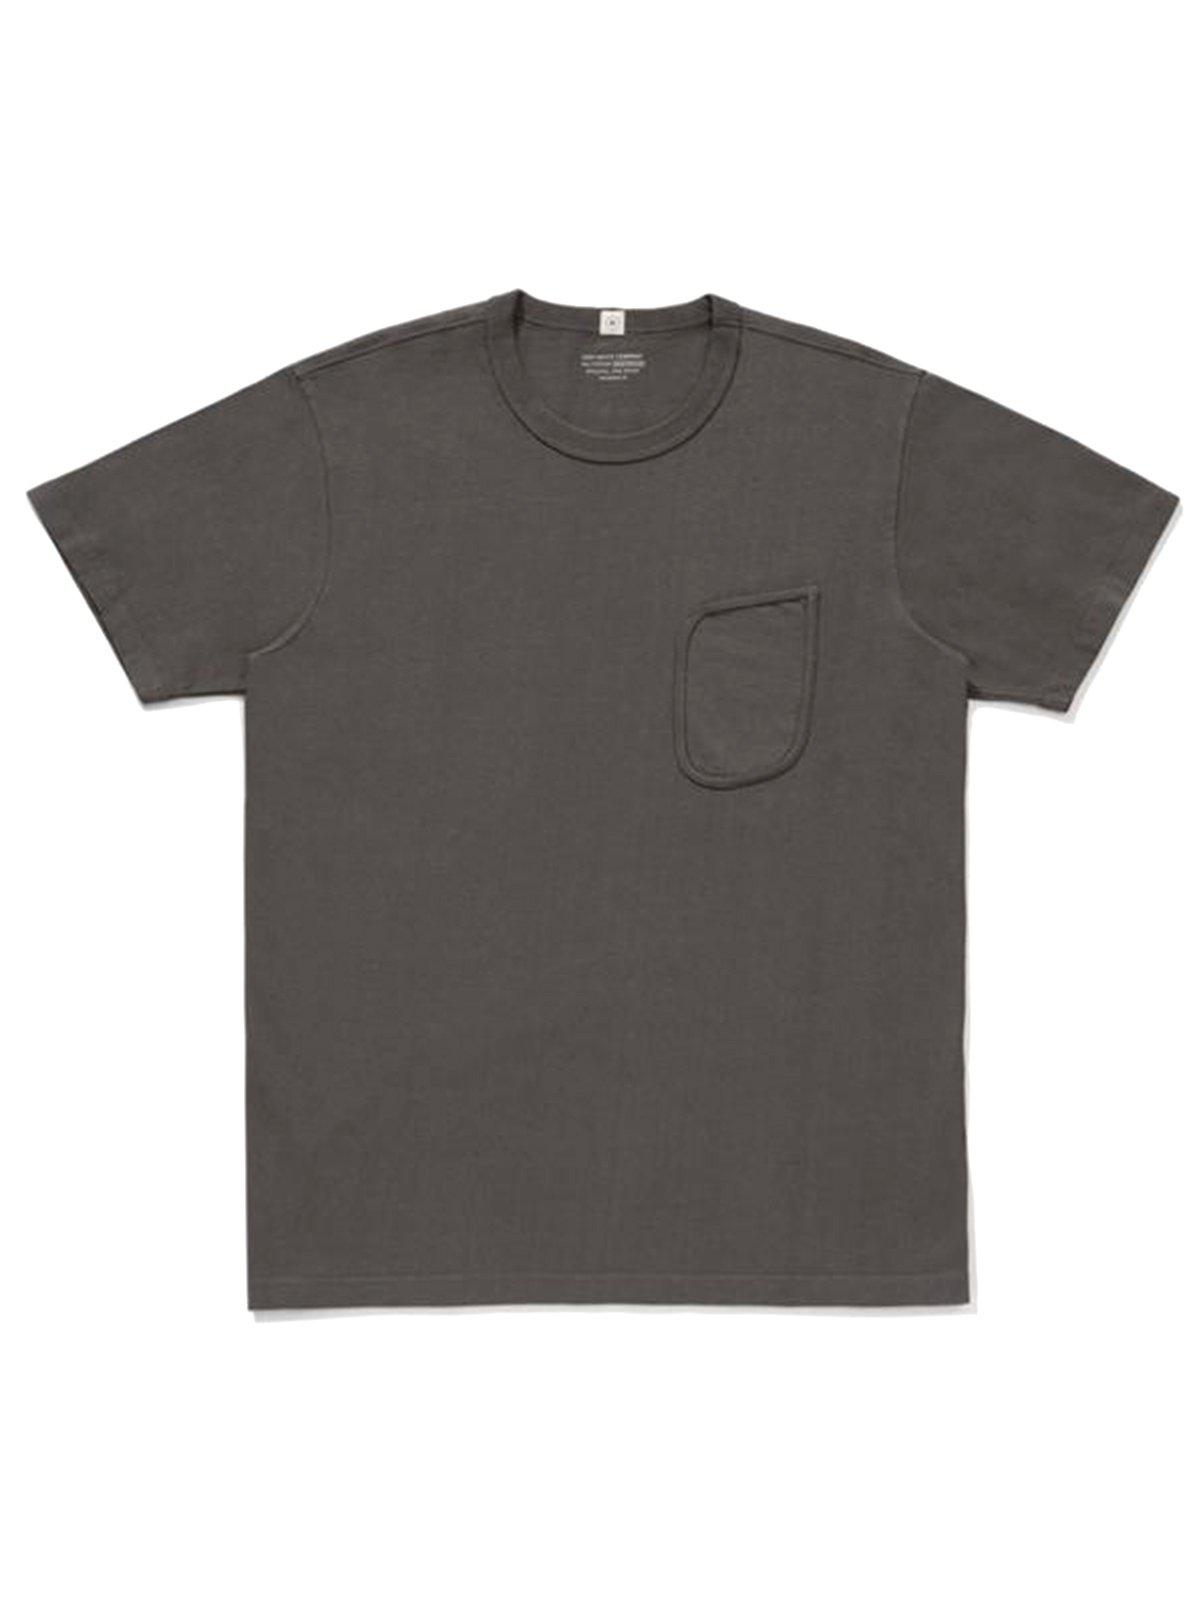 Lady White Co. Clark Pocket Tee Cement - MORE by Morello Indonesia